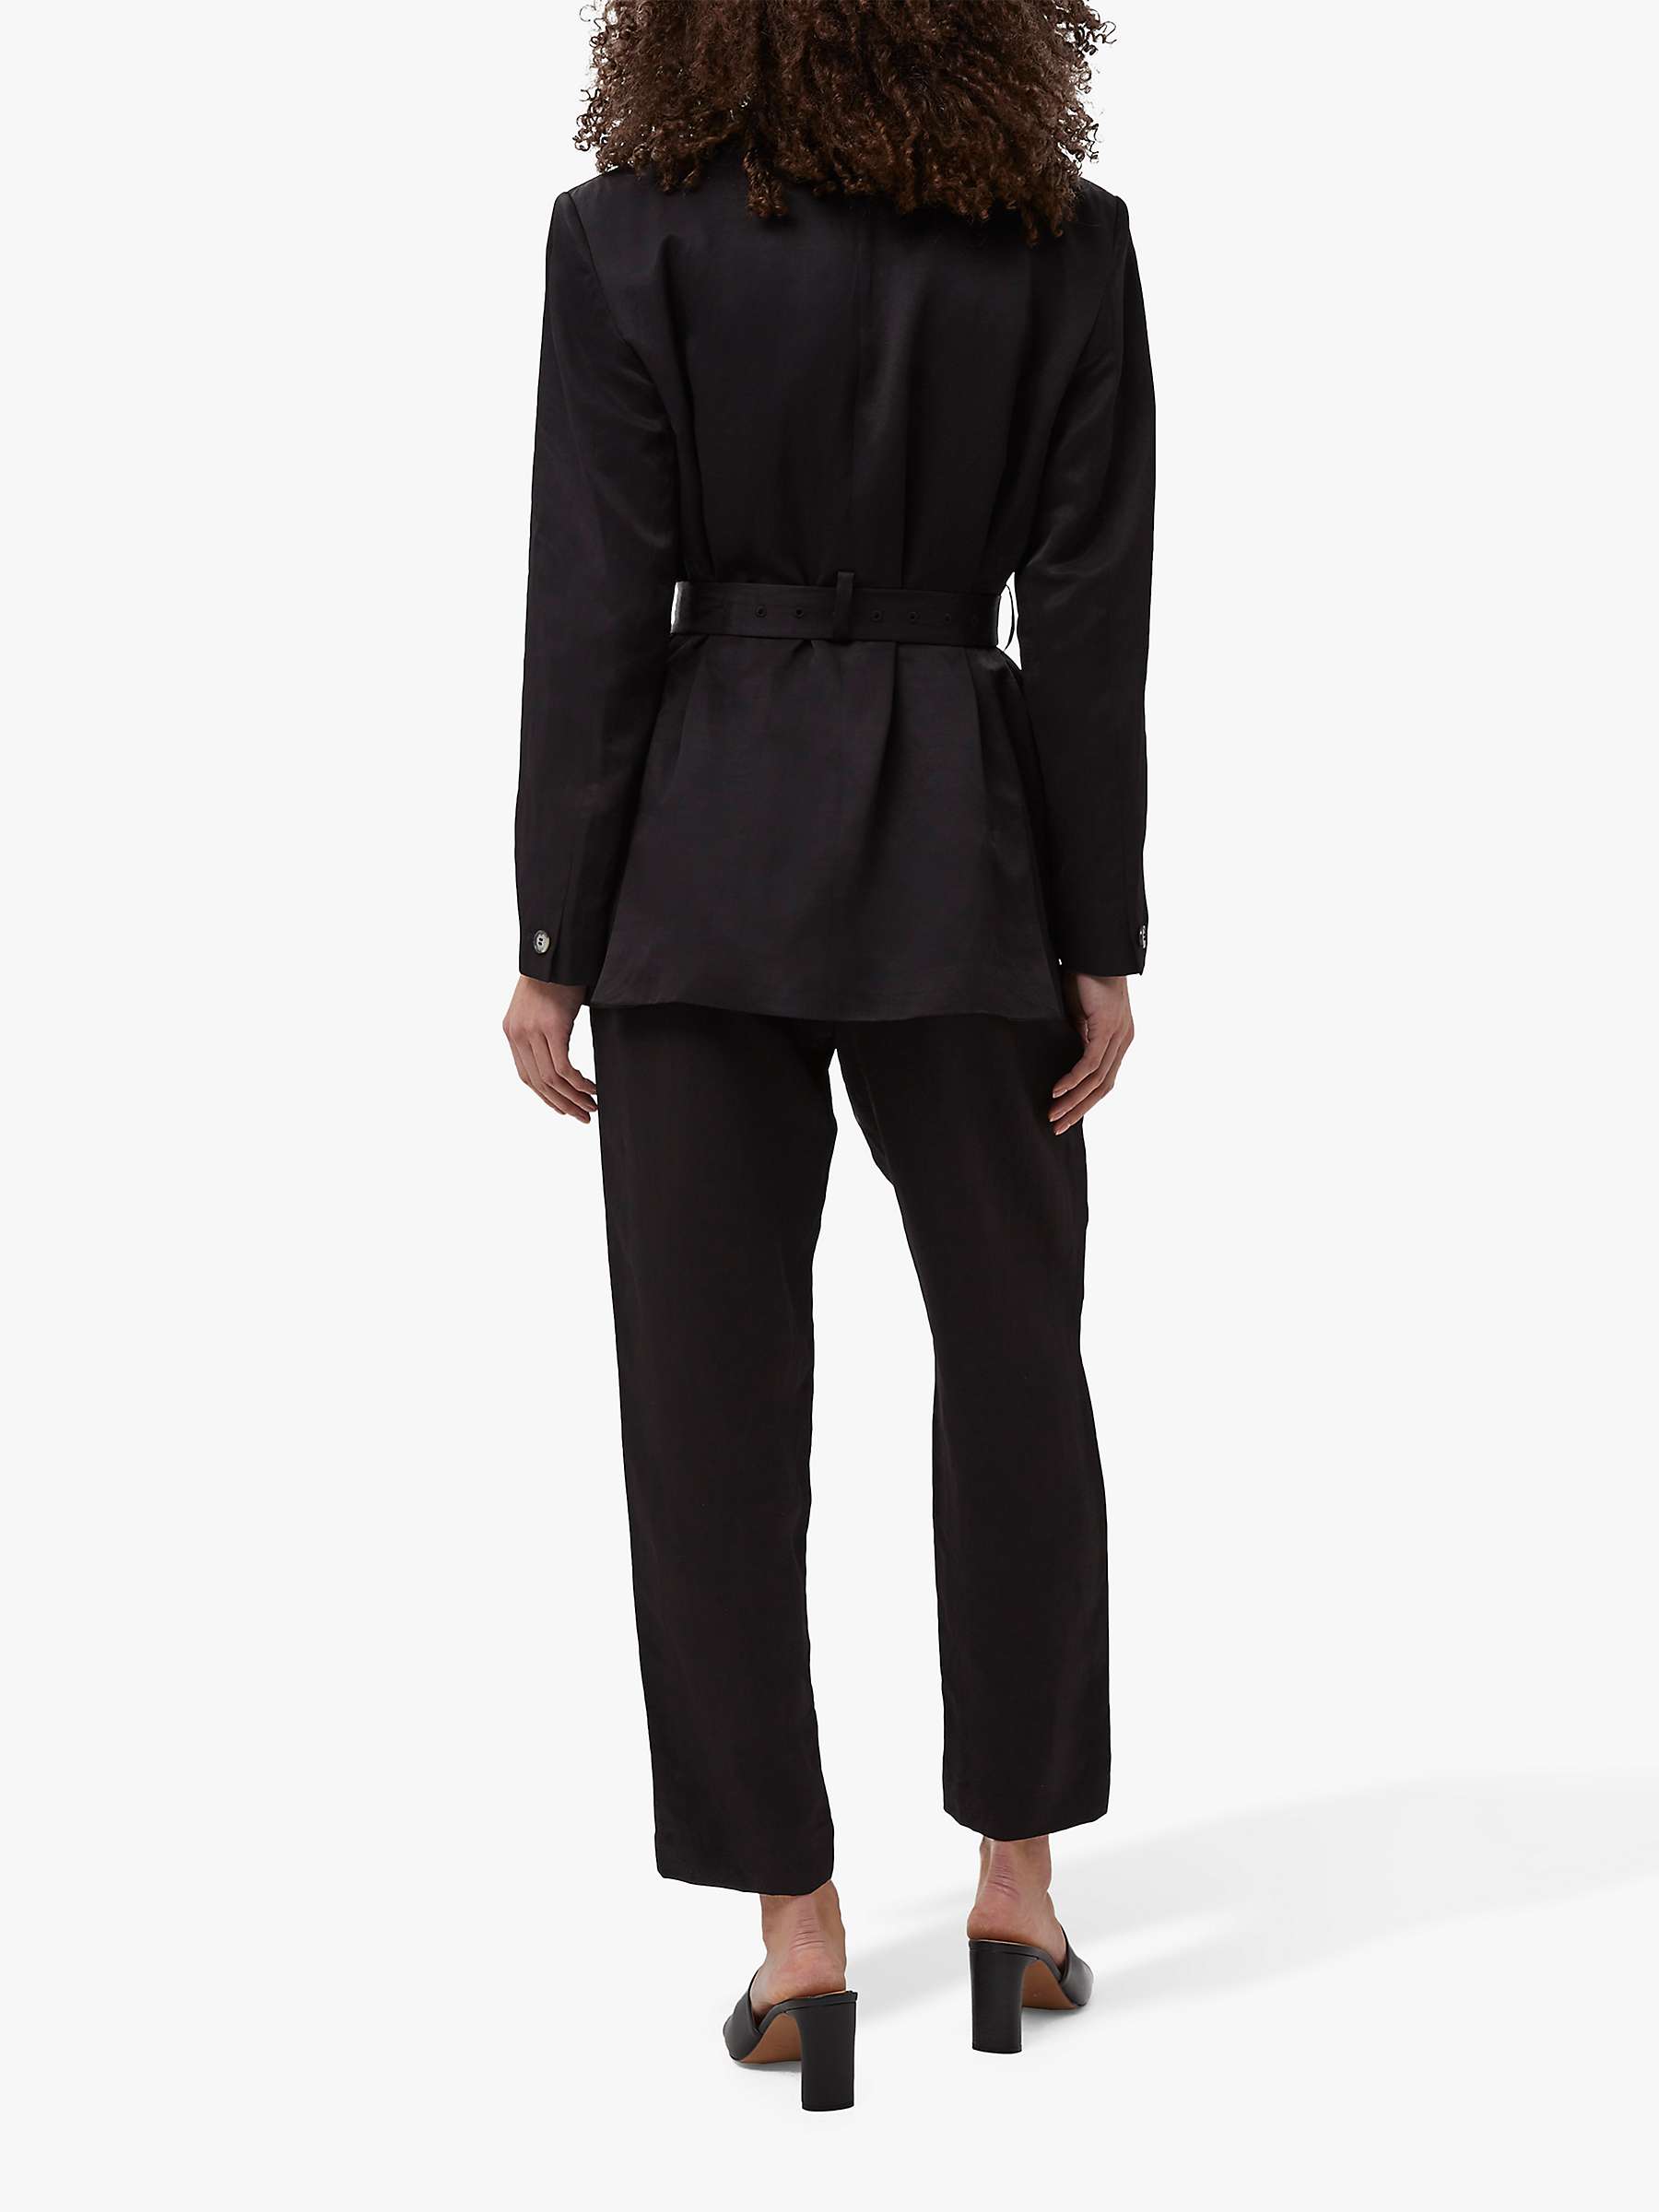 Buy French Connection Carena Suiting Double Breasted Blazer, Black Online at johnlewis.com